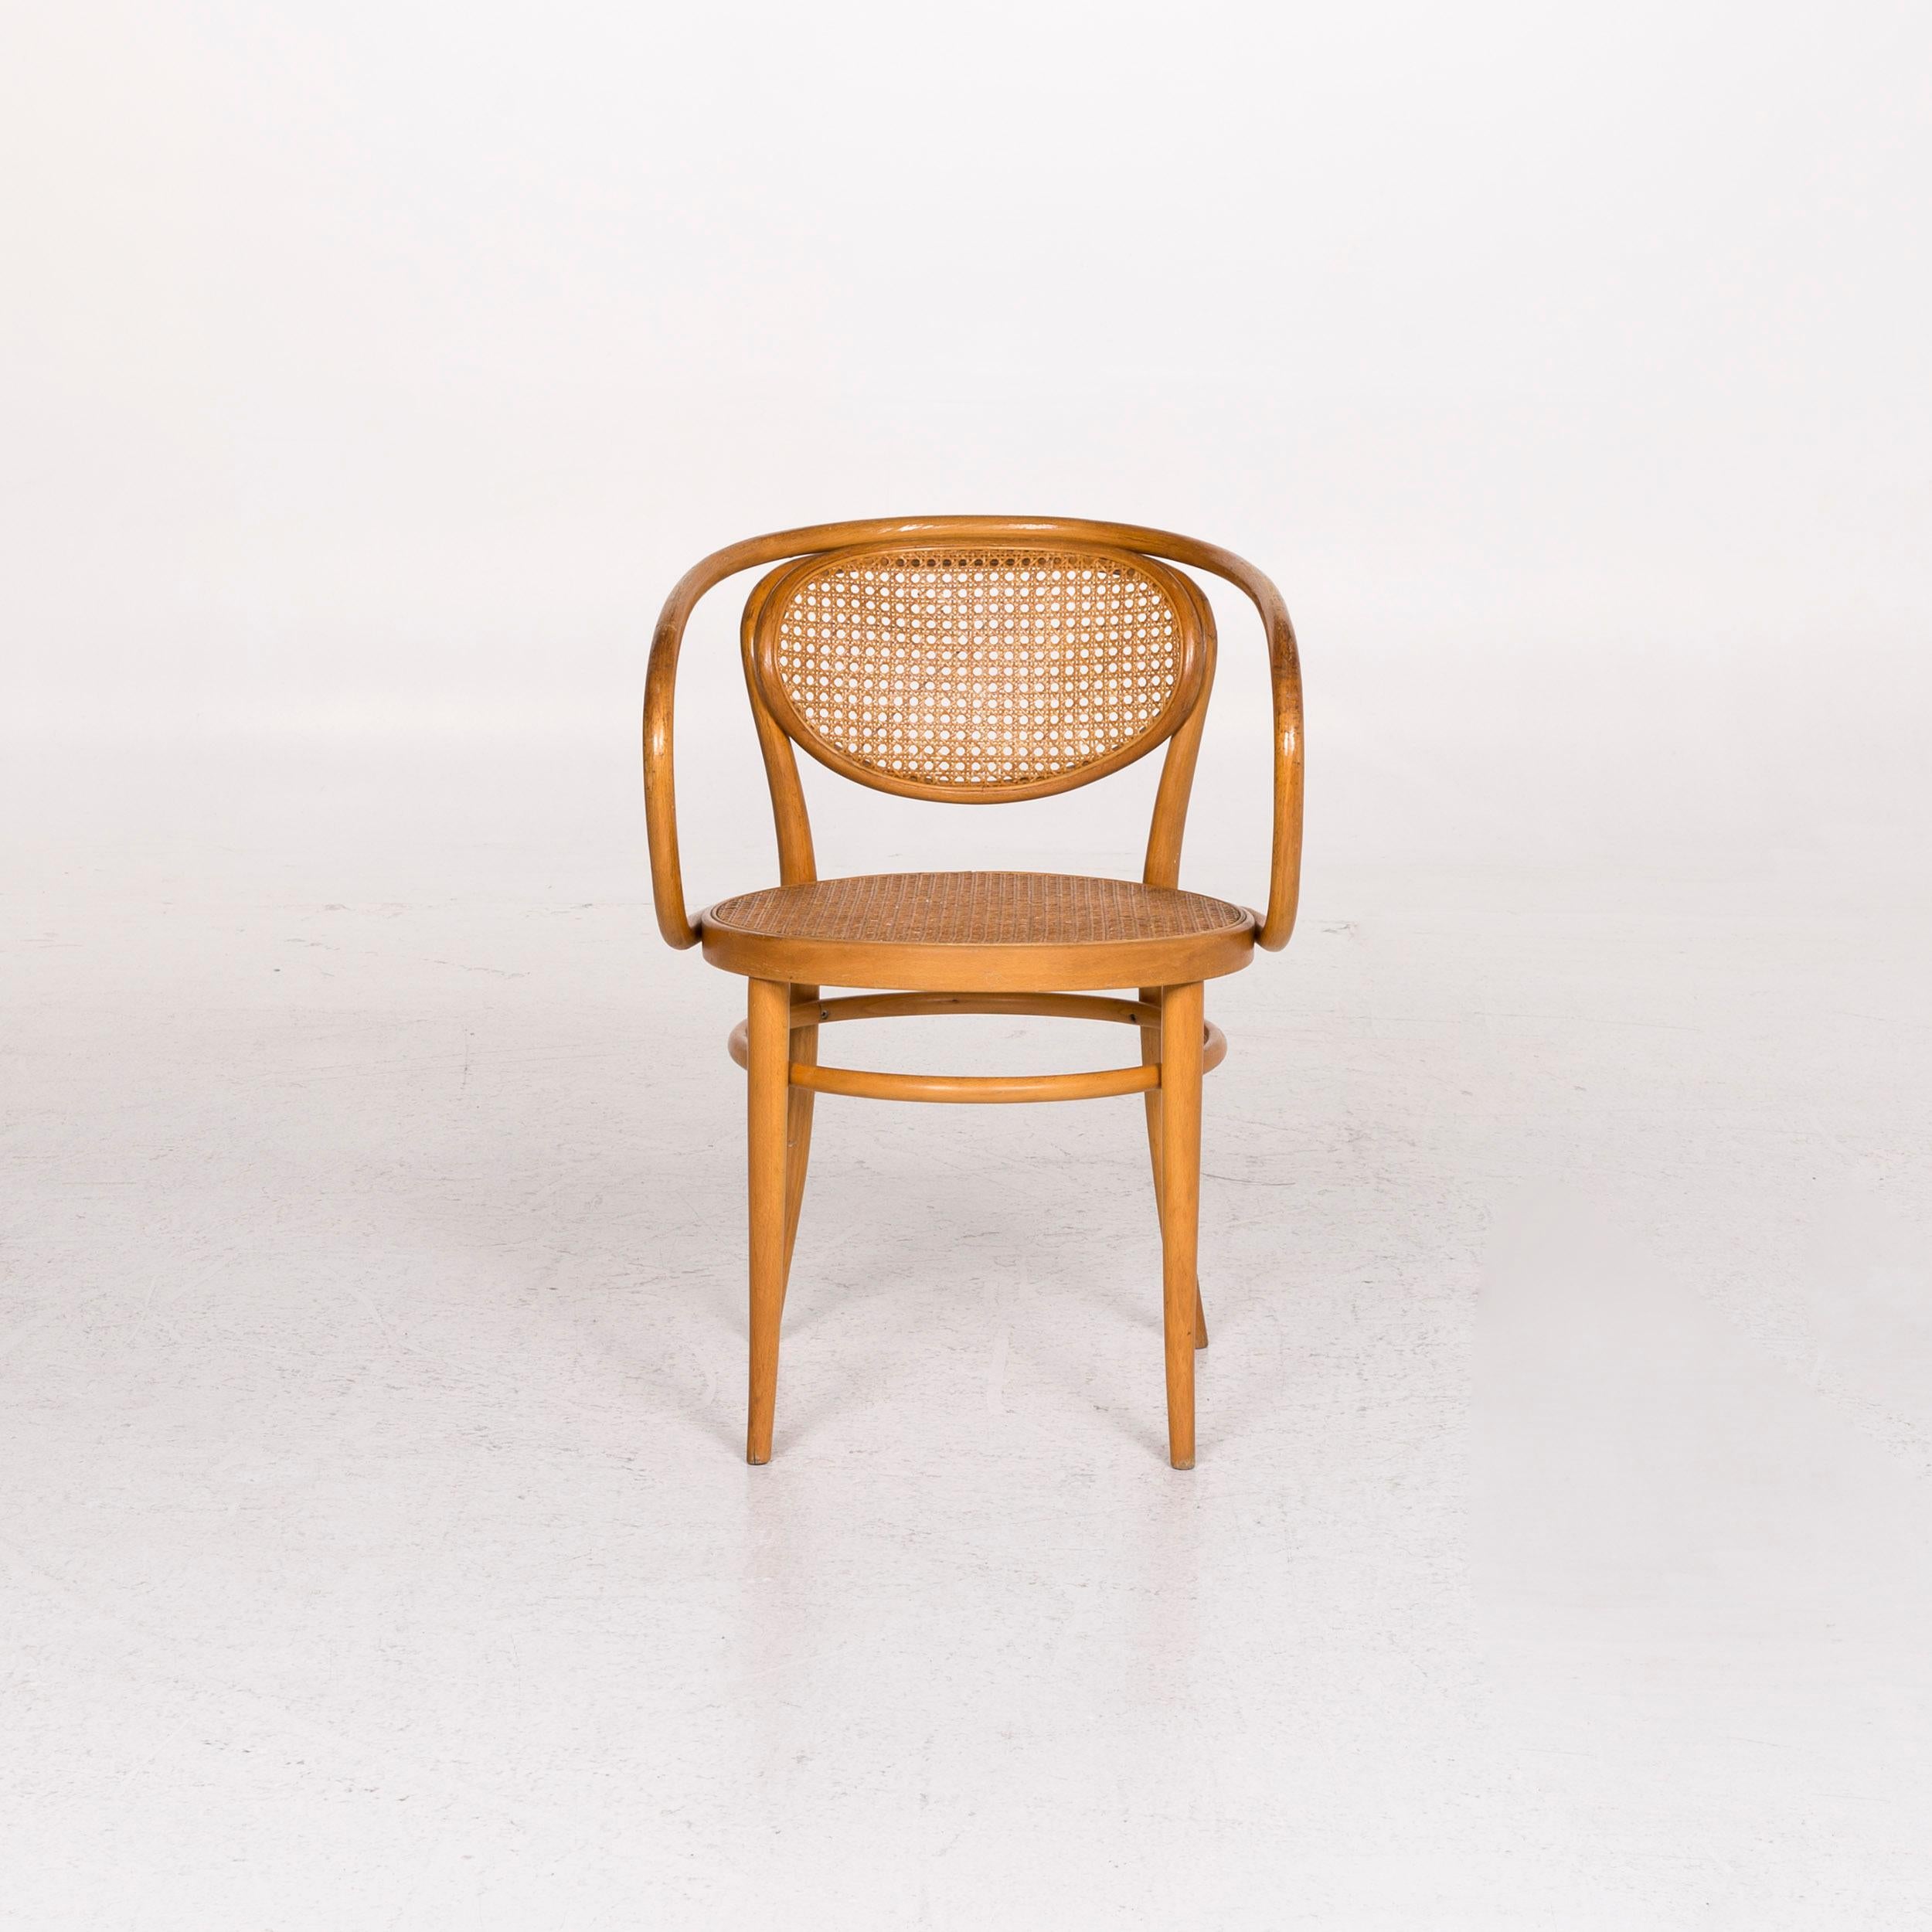 We bring to you a Thonet 210R wood rattan chair.

 

 Product measurements in centimeters:
 

Depth 56
Width 56
Height 77
Seat-height 46
Rest-height 73
Seat-depth 45
Seat-width 51
Back-height 31.